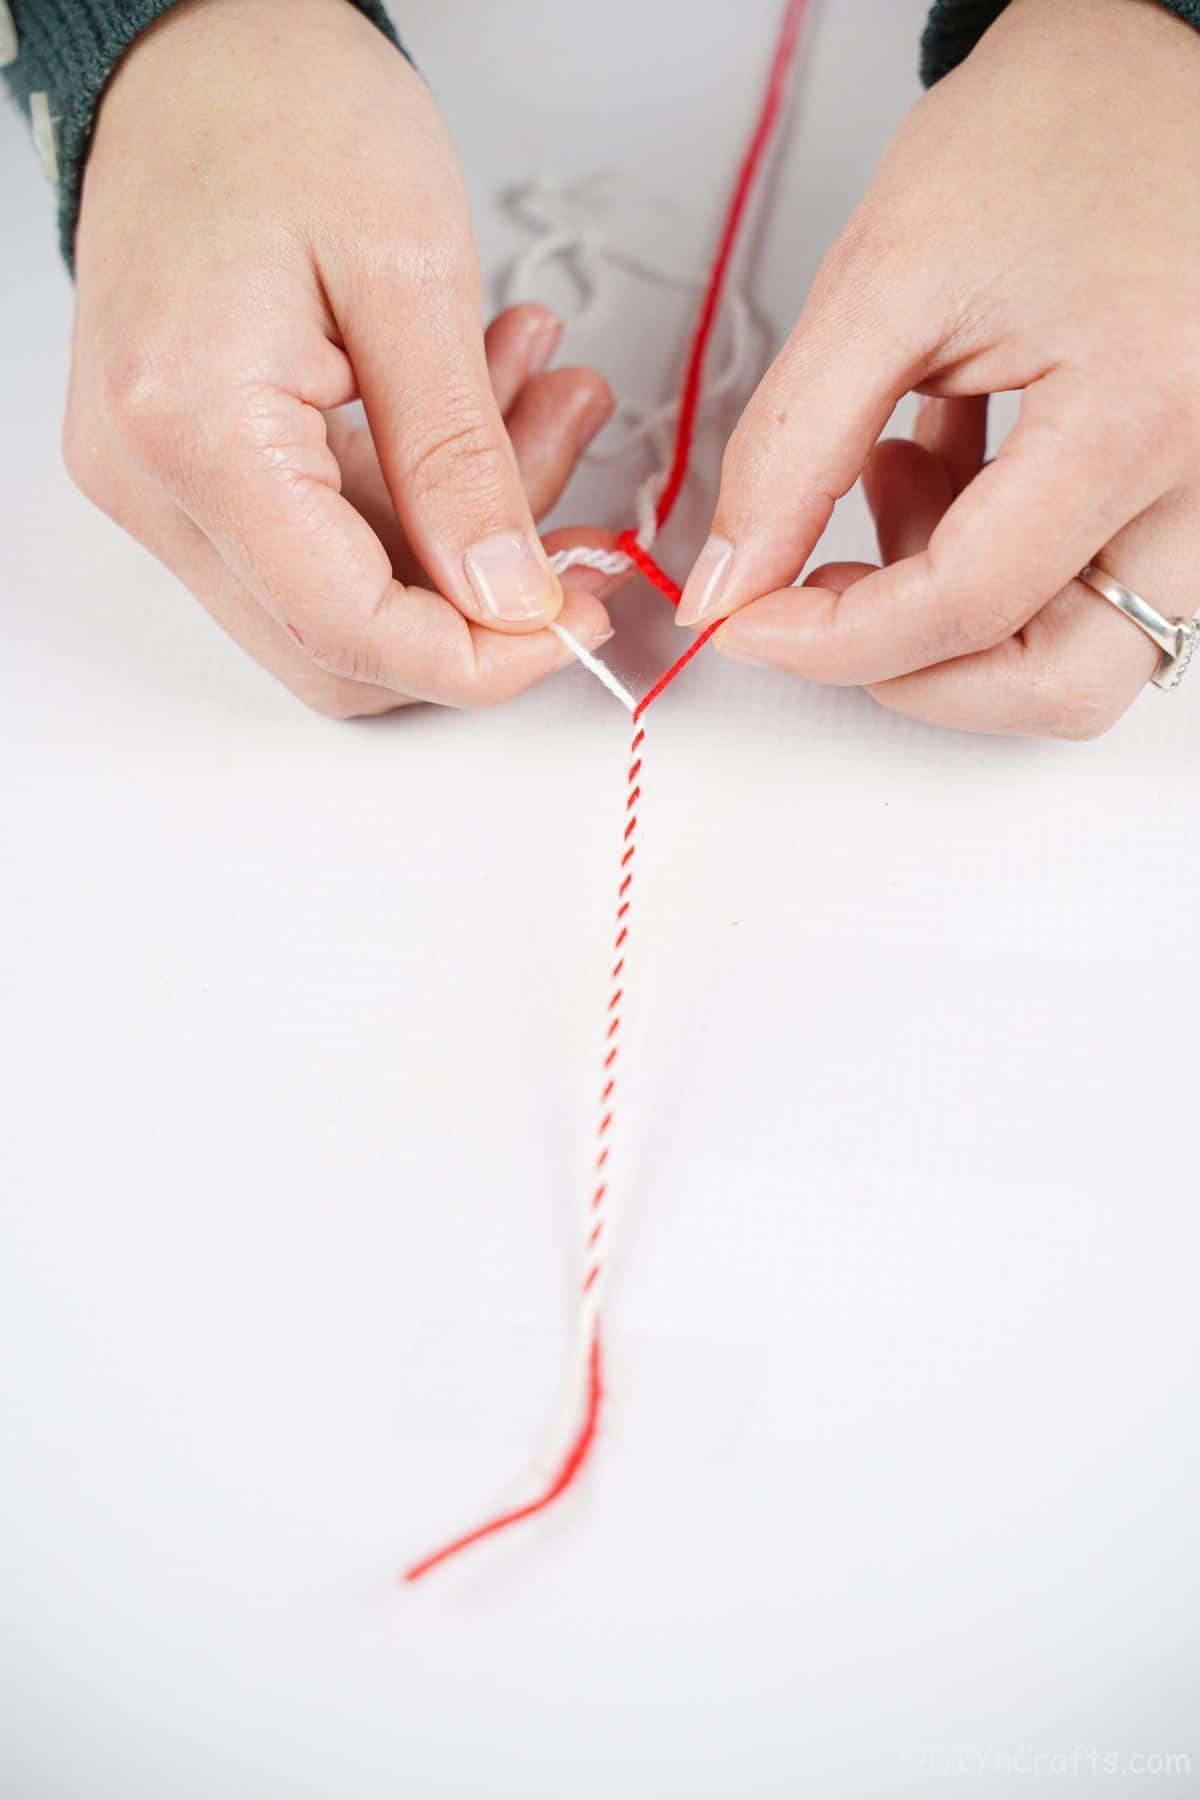 red and white yarn on table being twisted together